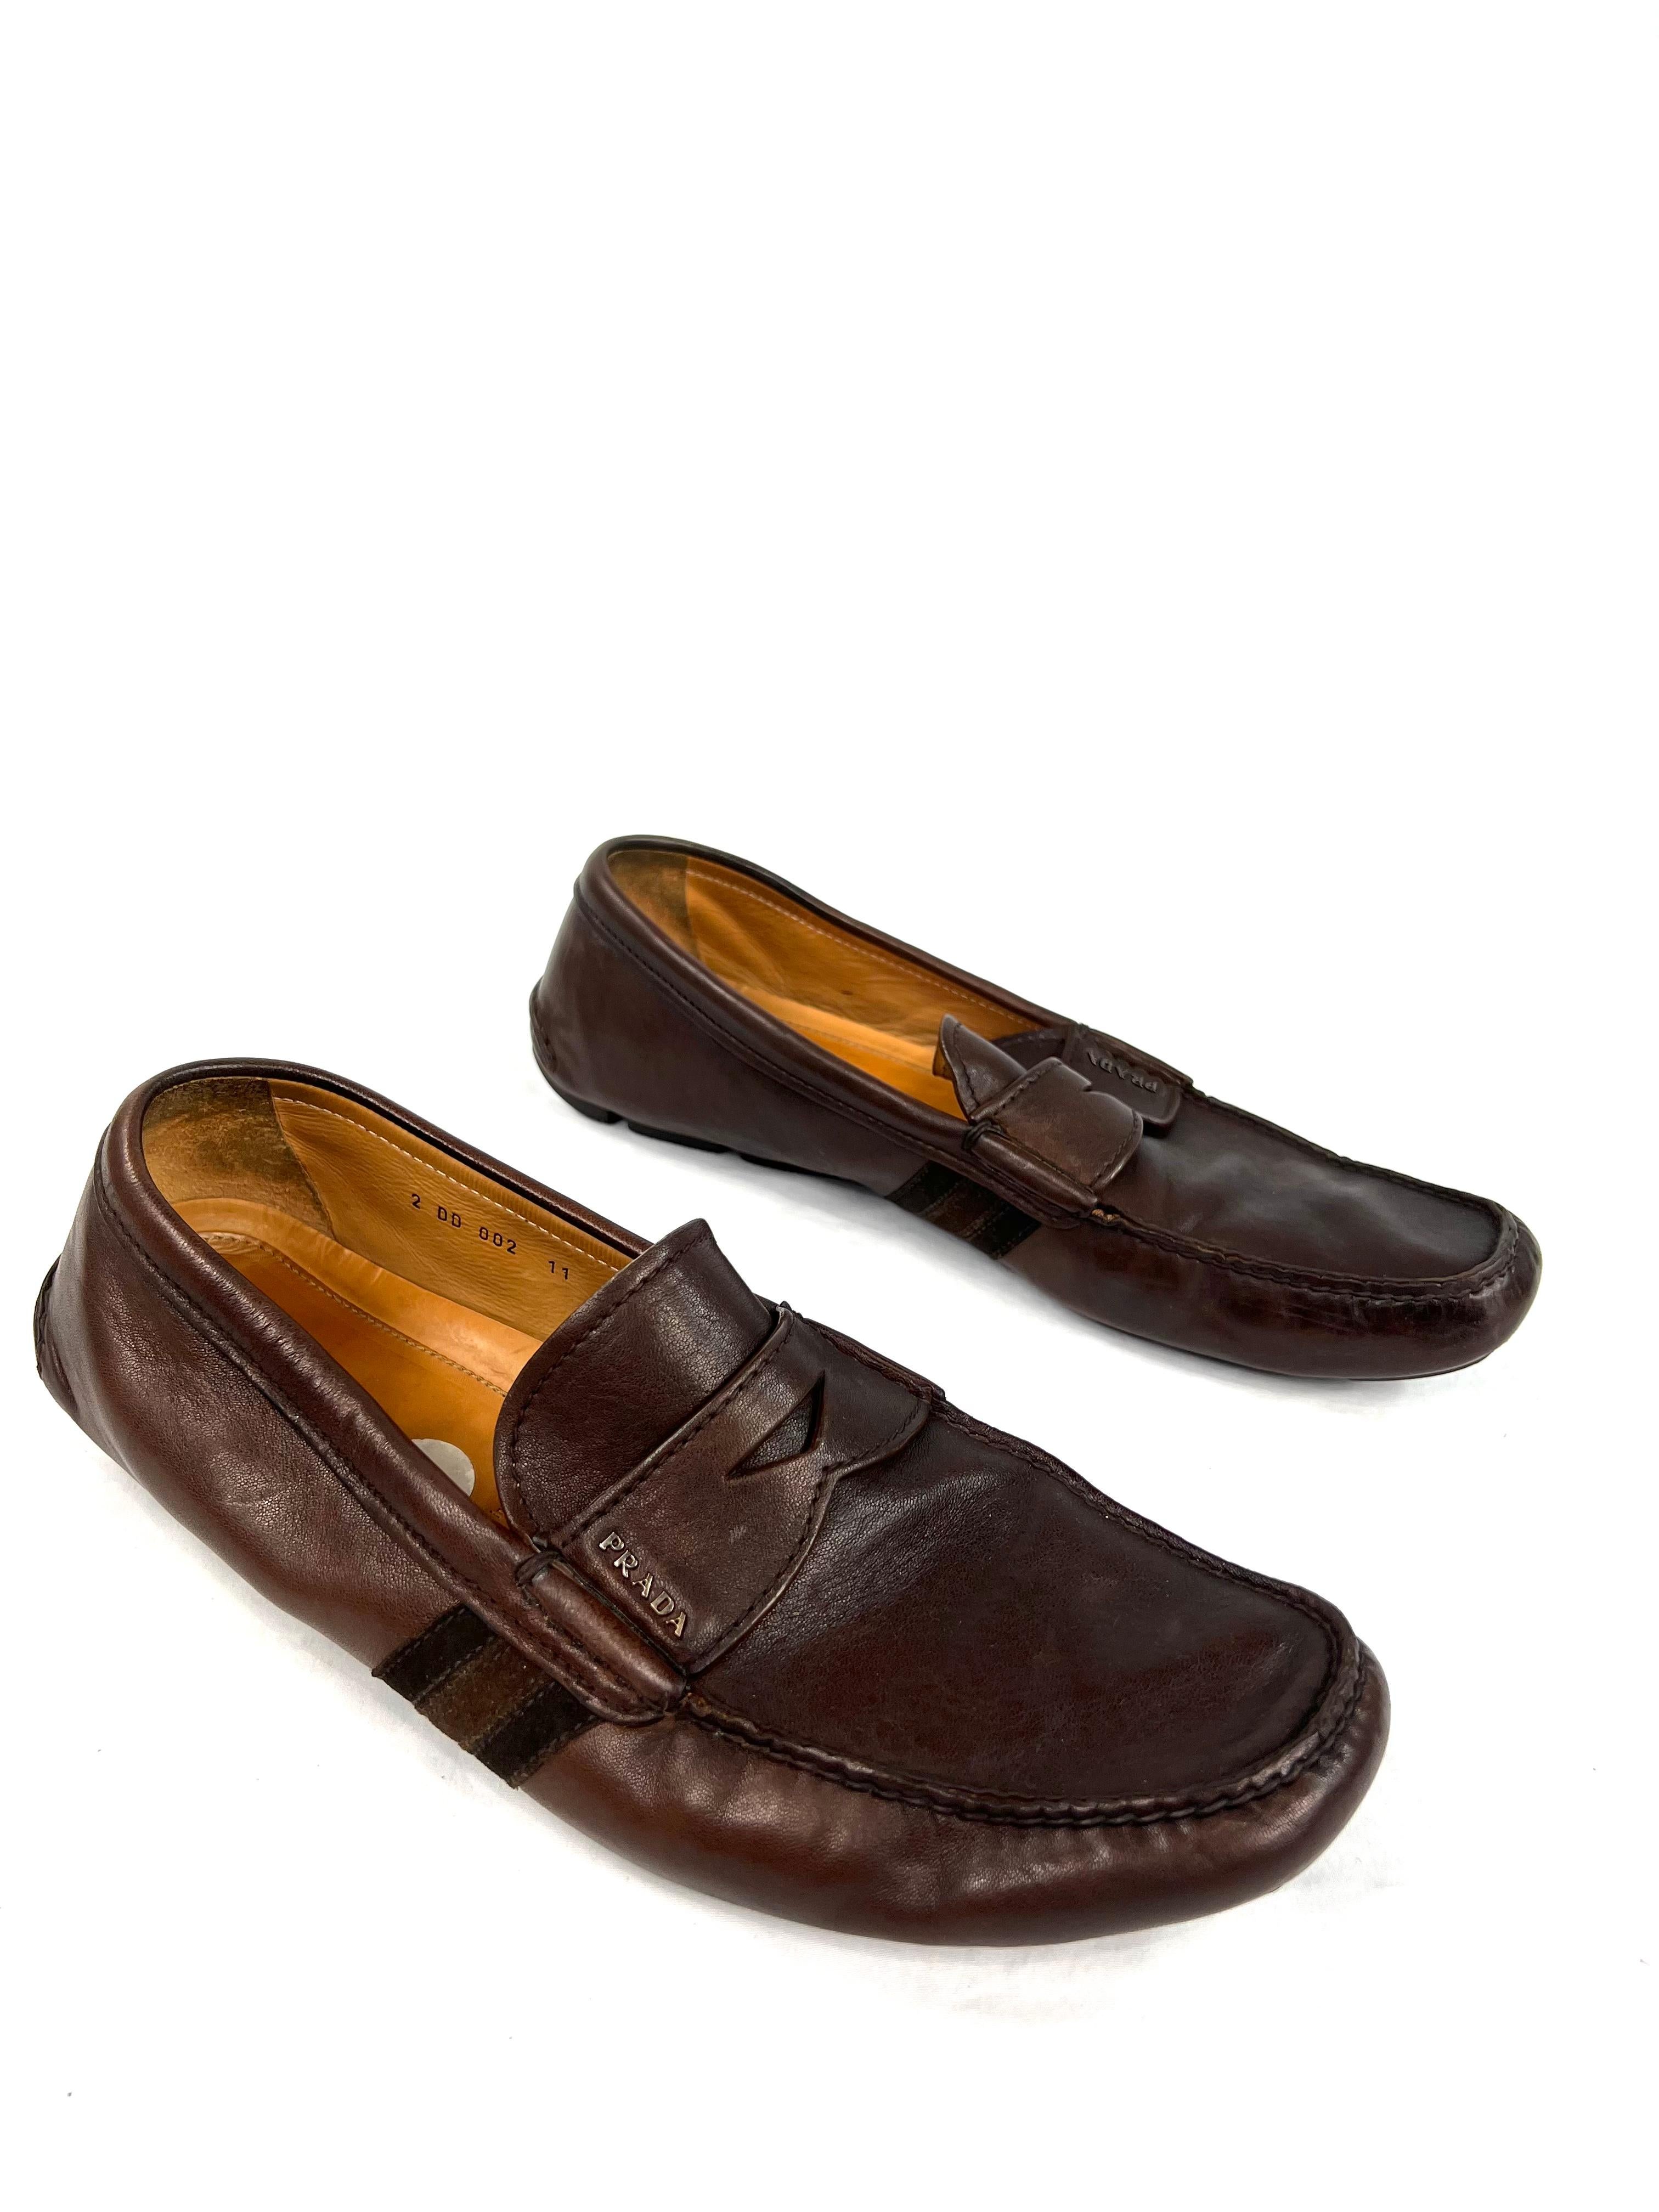 Prada Brown Leather Moccasins Flat Shoes, Size 11 In Excellent Condition For Sale In Beverly Hills, CA